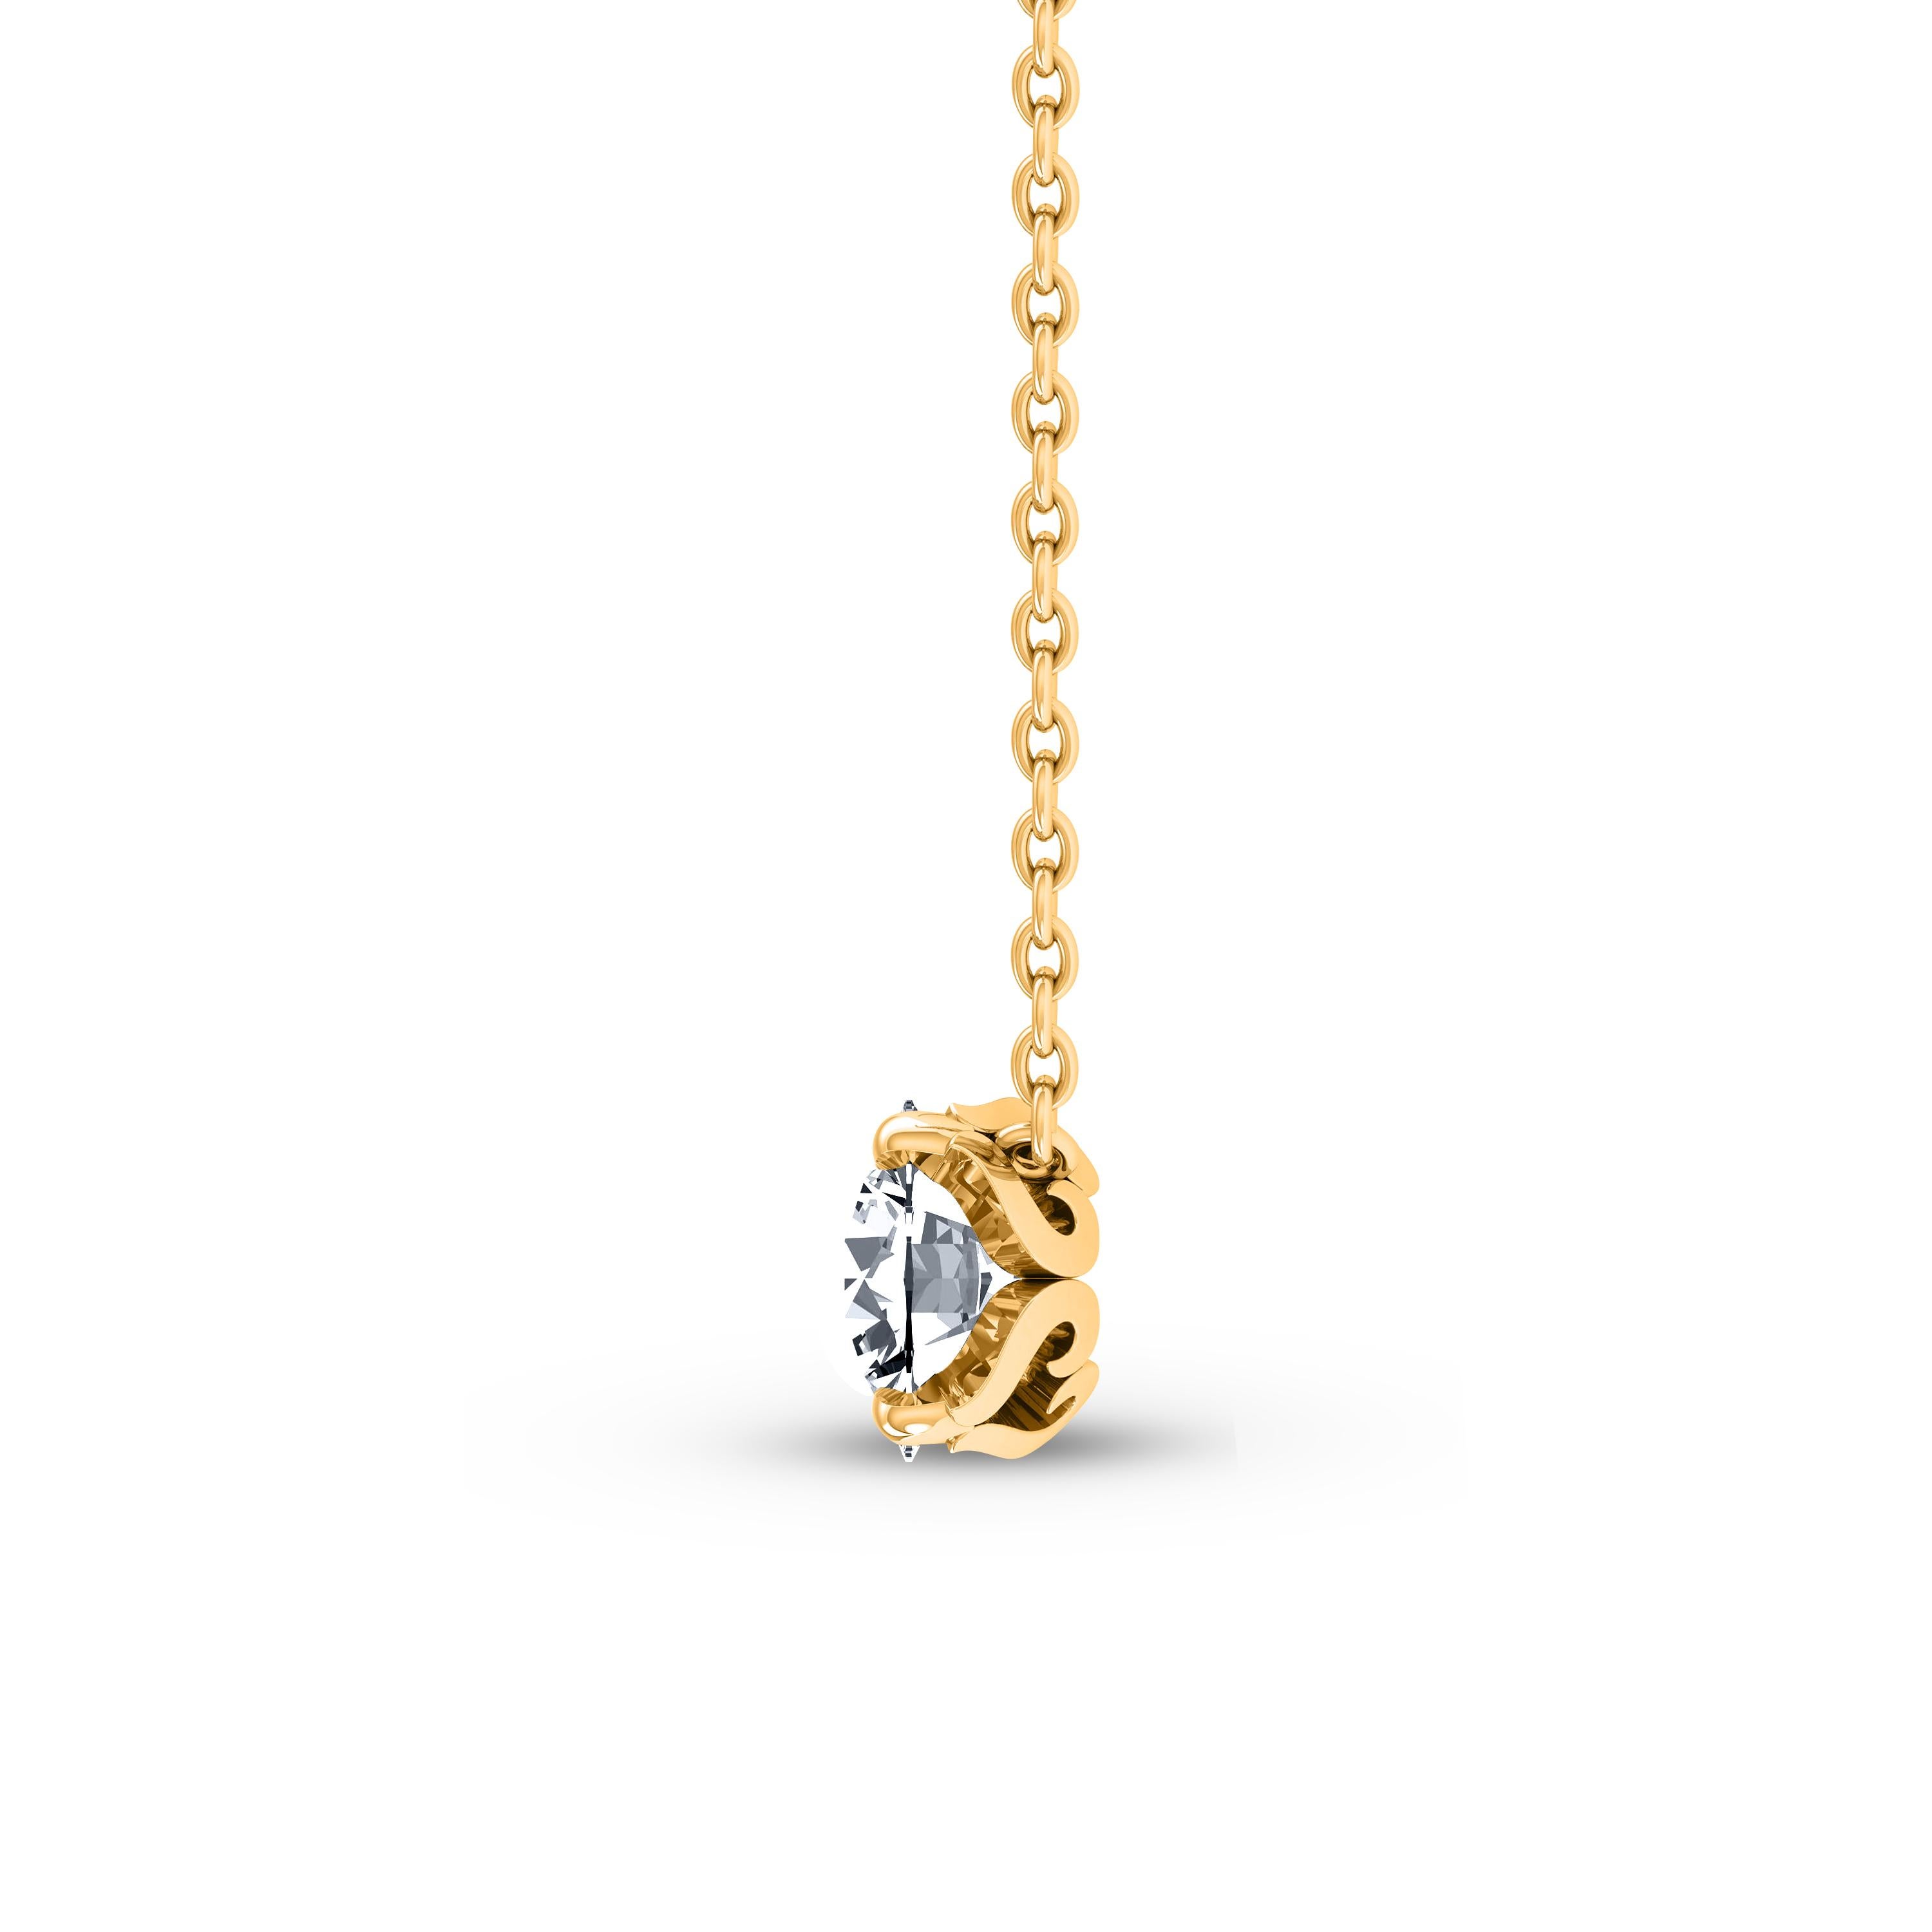 Contemporary HARAKH GIA Certified 0.27 Carat Solitaire Diamond Pendant Necklace in 18 Kt Gold For Sale